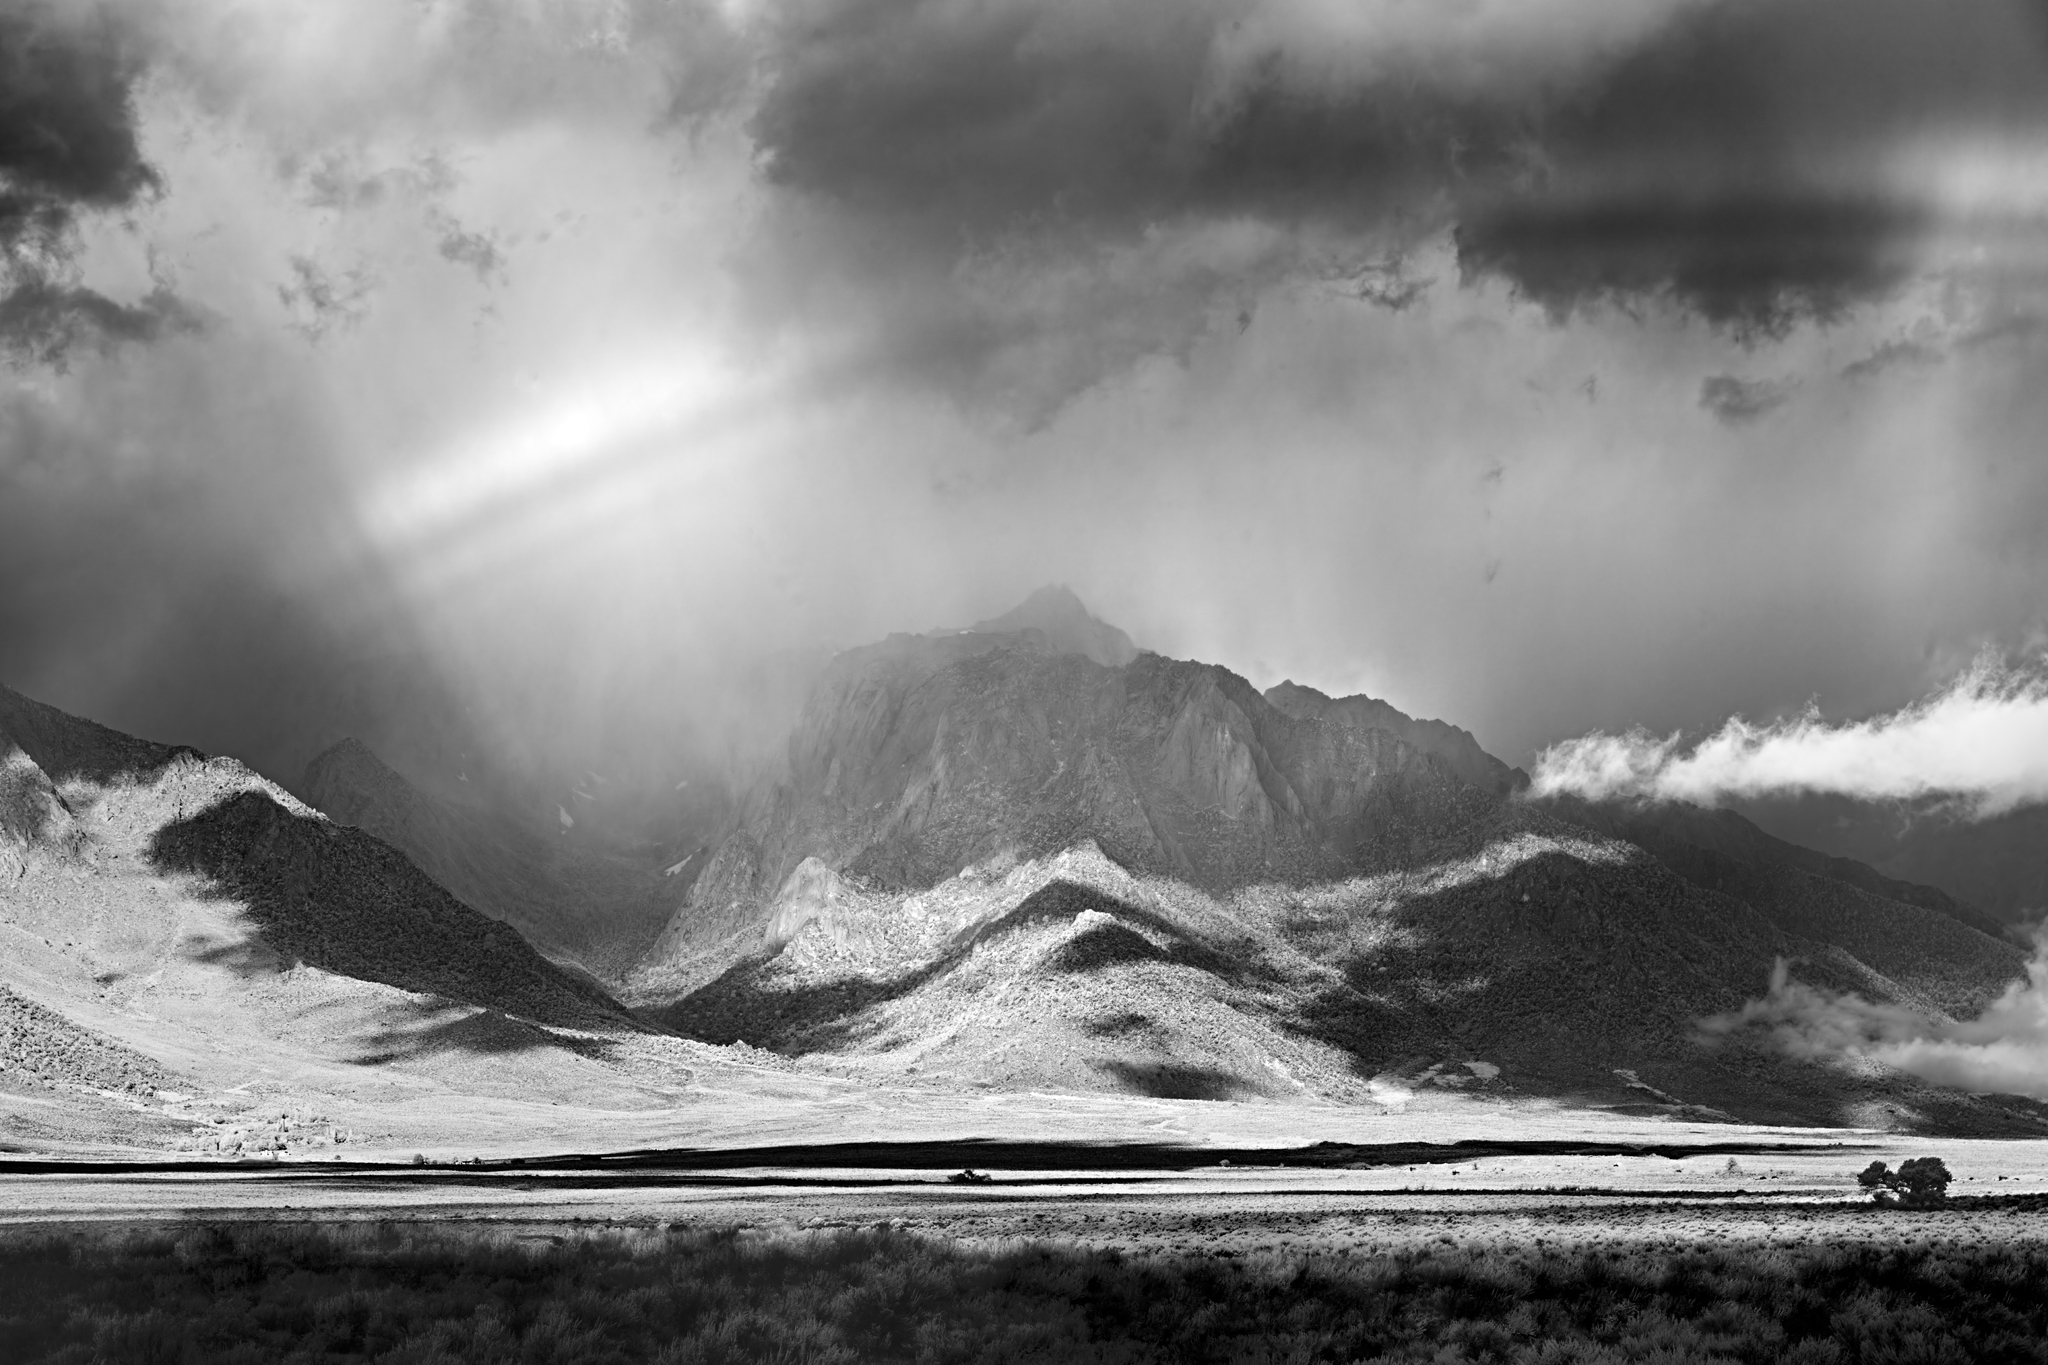 assets/images/artists/Mitch_Dobrowner/Mitch Dobrowner Lone Pine Peak at Catherine Couturier Gallery